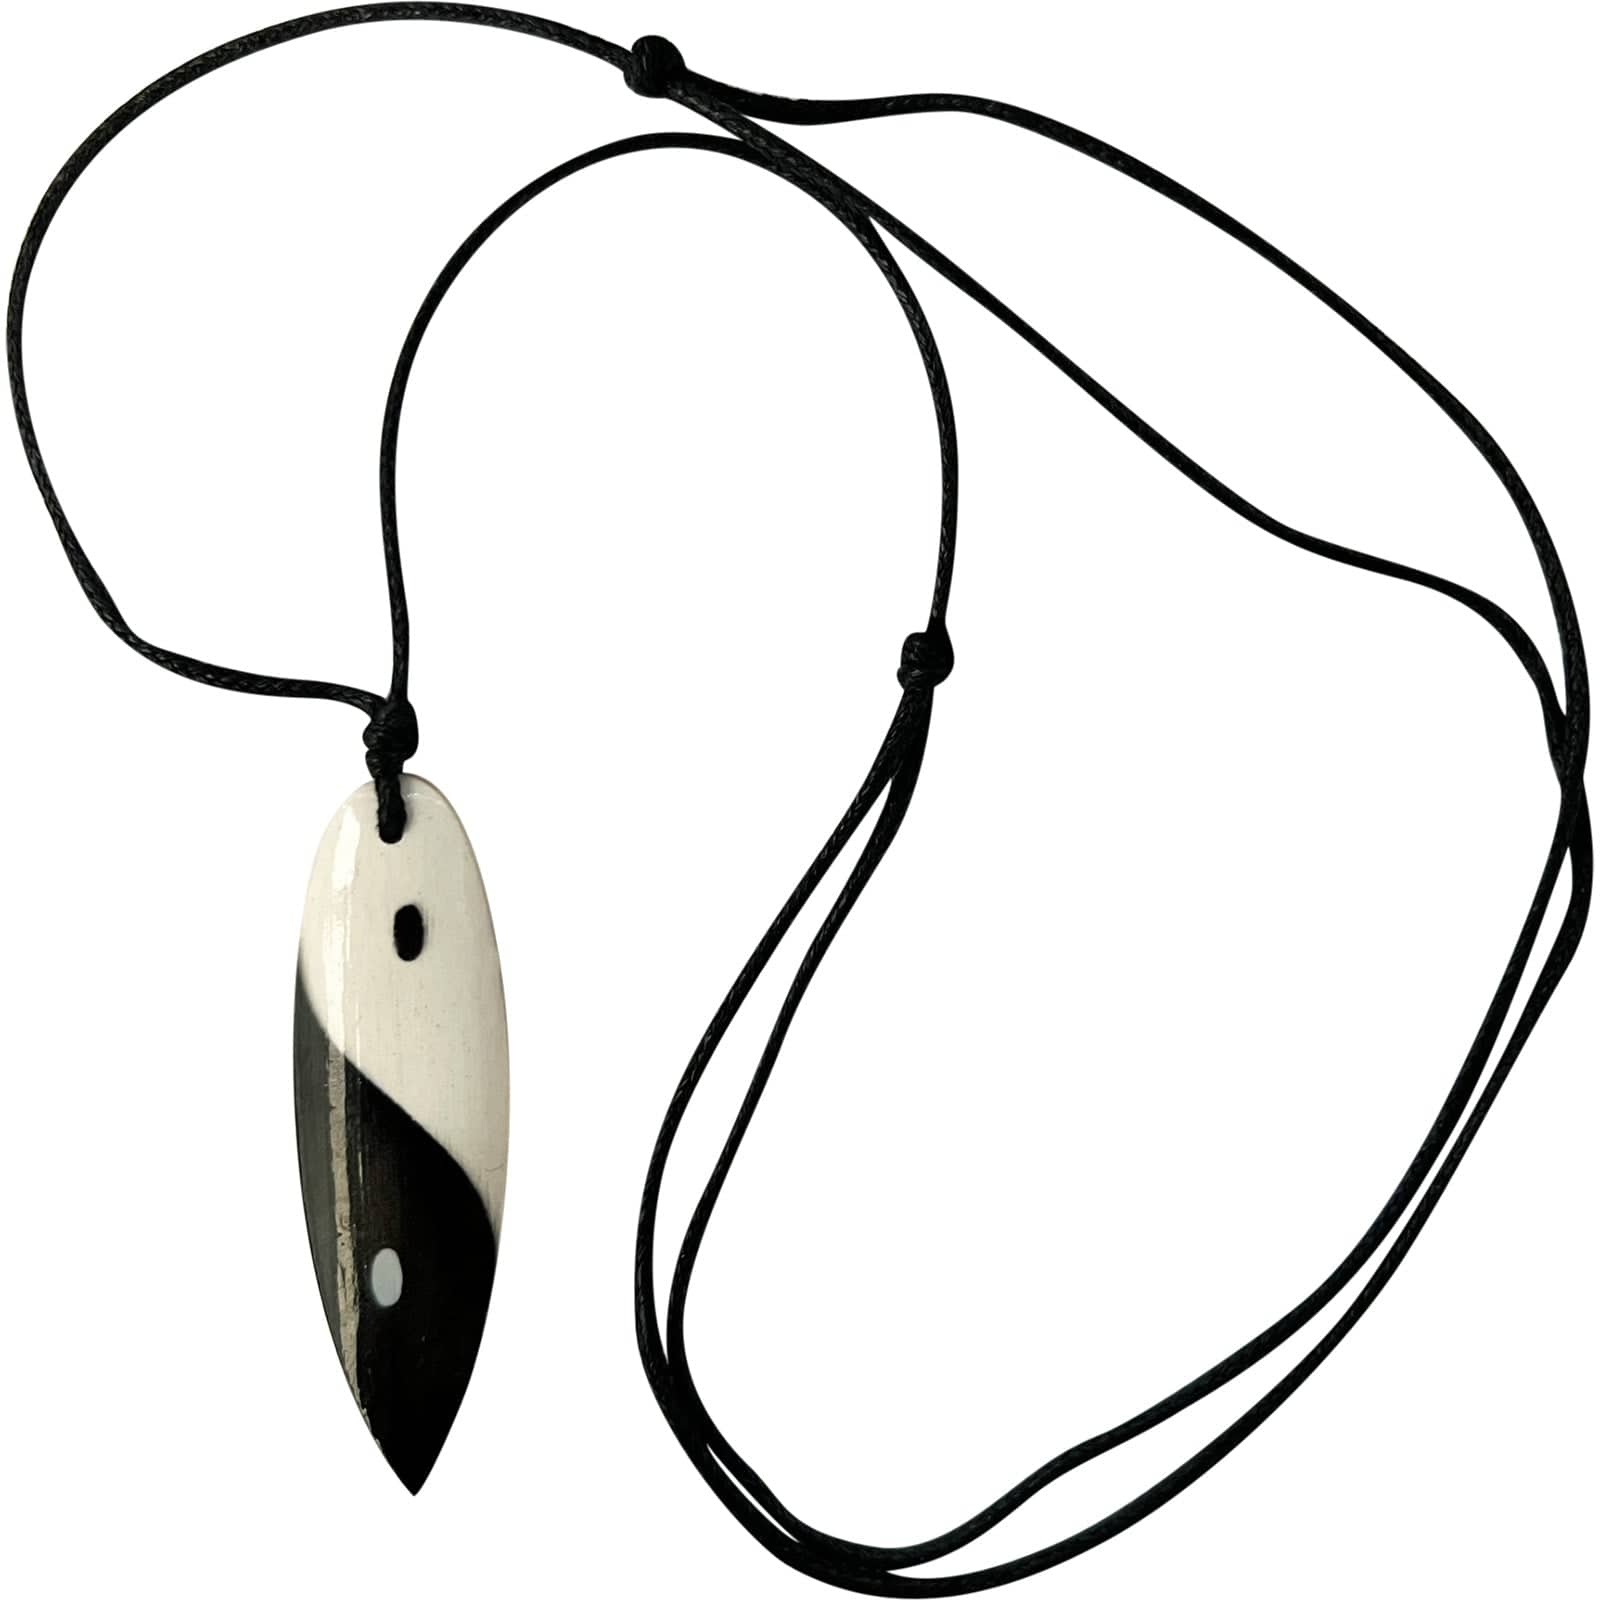 Yin and Yang Surfboard Pendant Necklace Black Cord Chain Mens Womens Jewellery